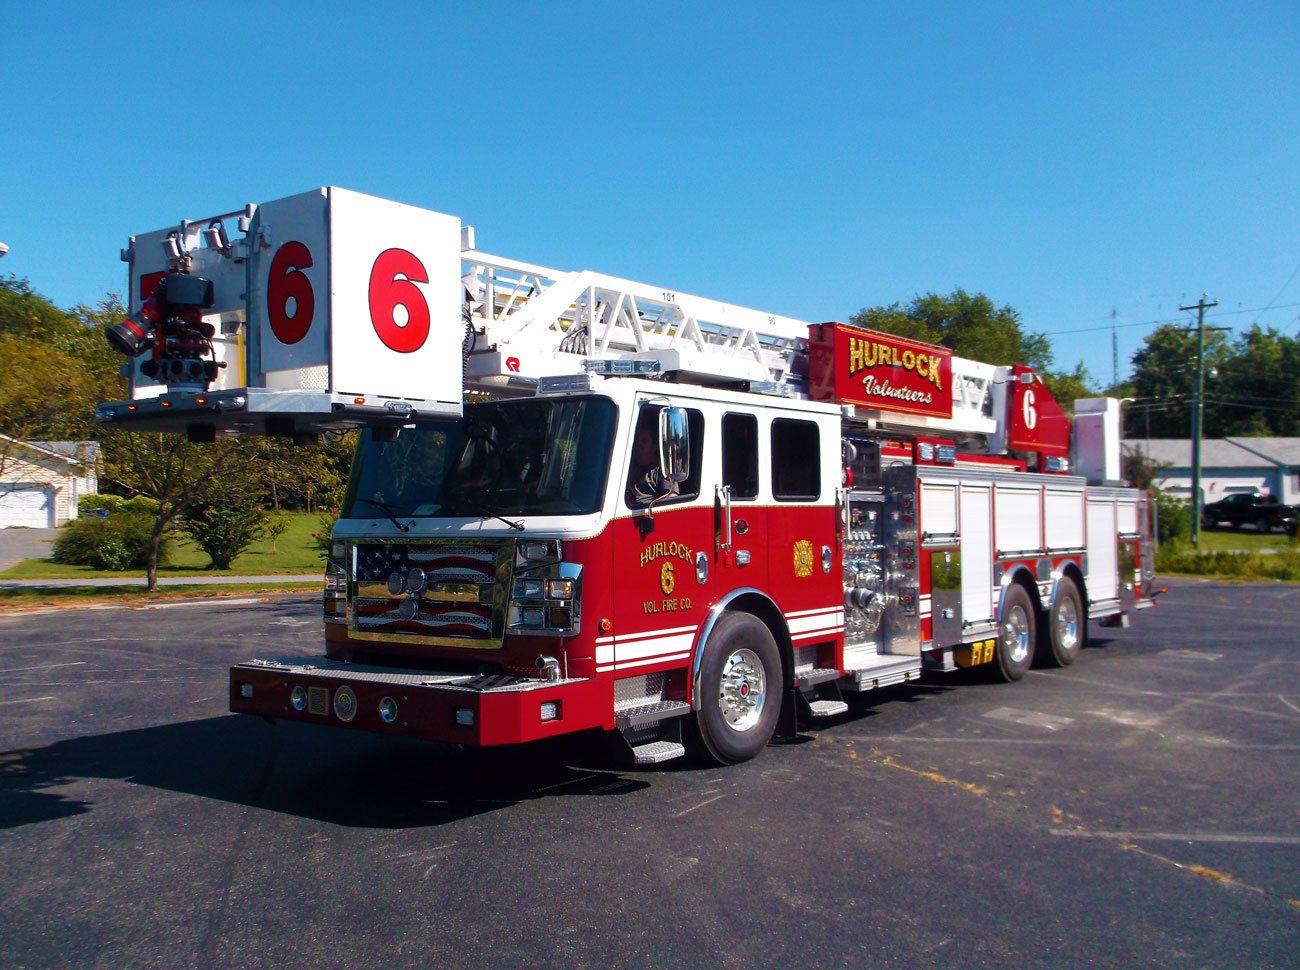 Featured image for “Hurlock Volunteer Fire Company – Dorchester County, MD”